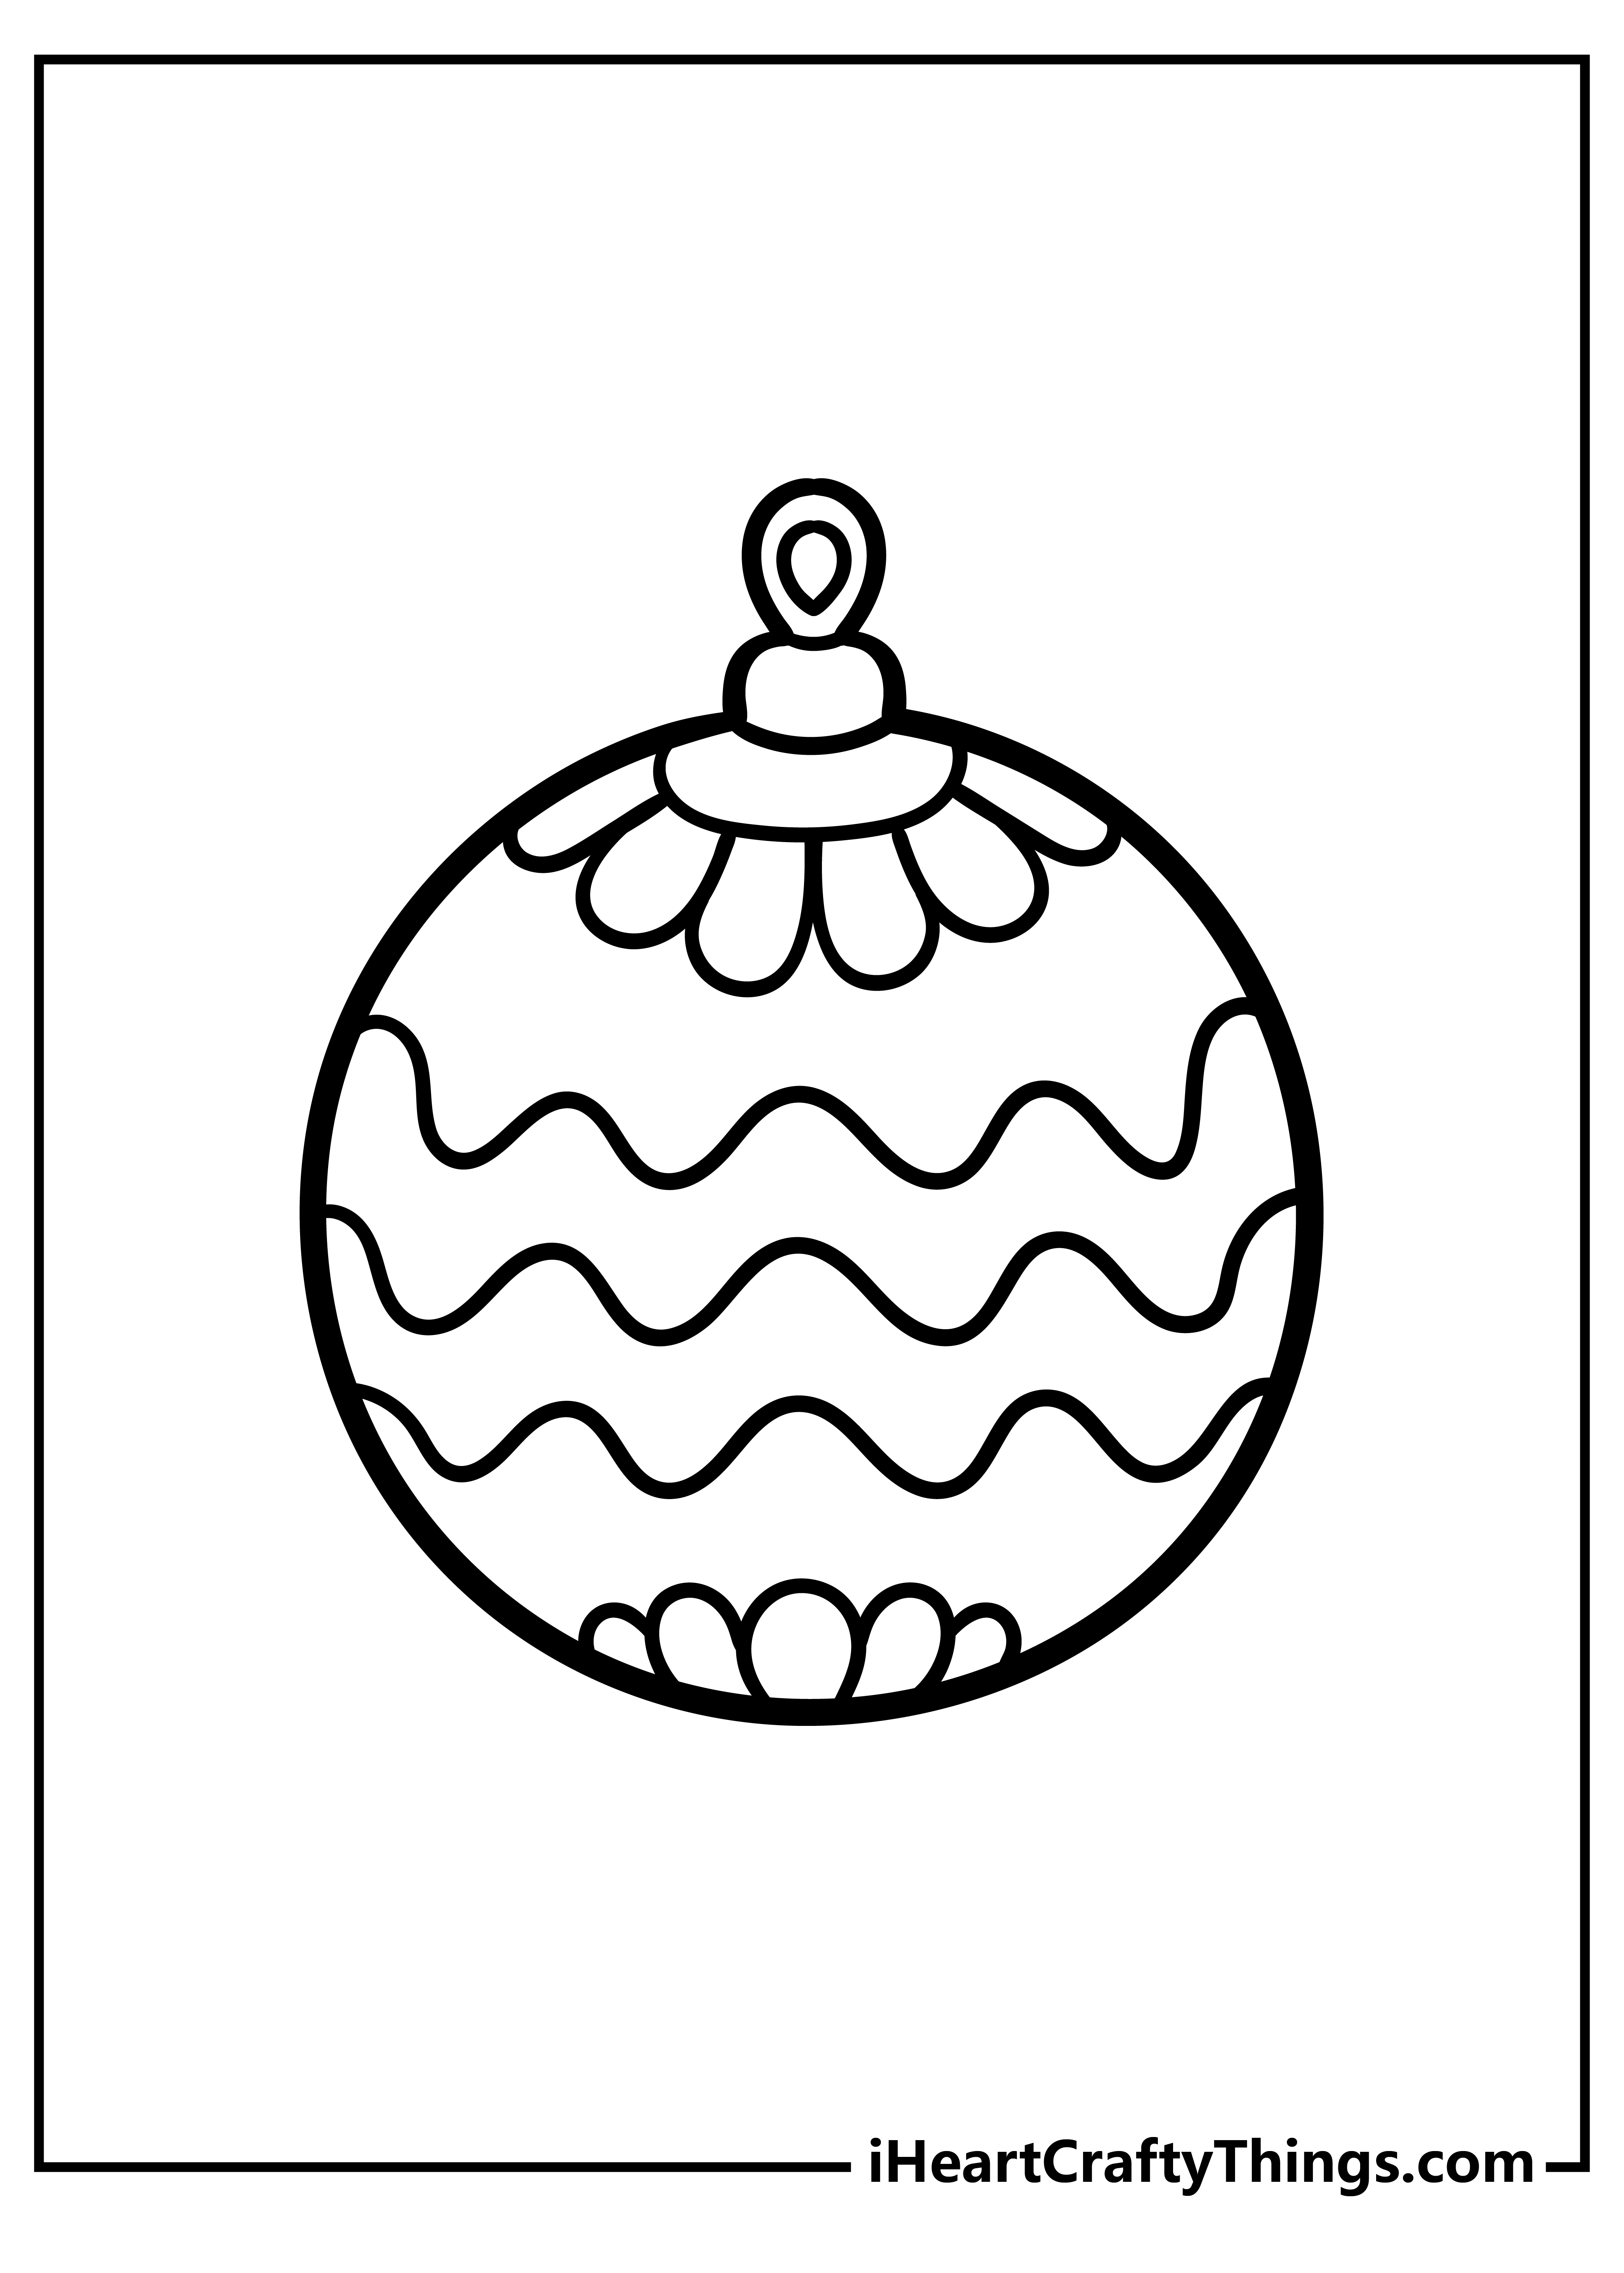 Free Printable 12 Christmas Coloring Pages - Simply Love Printables